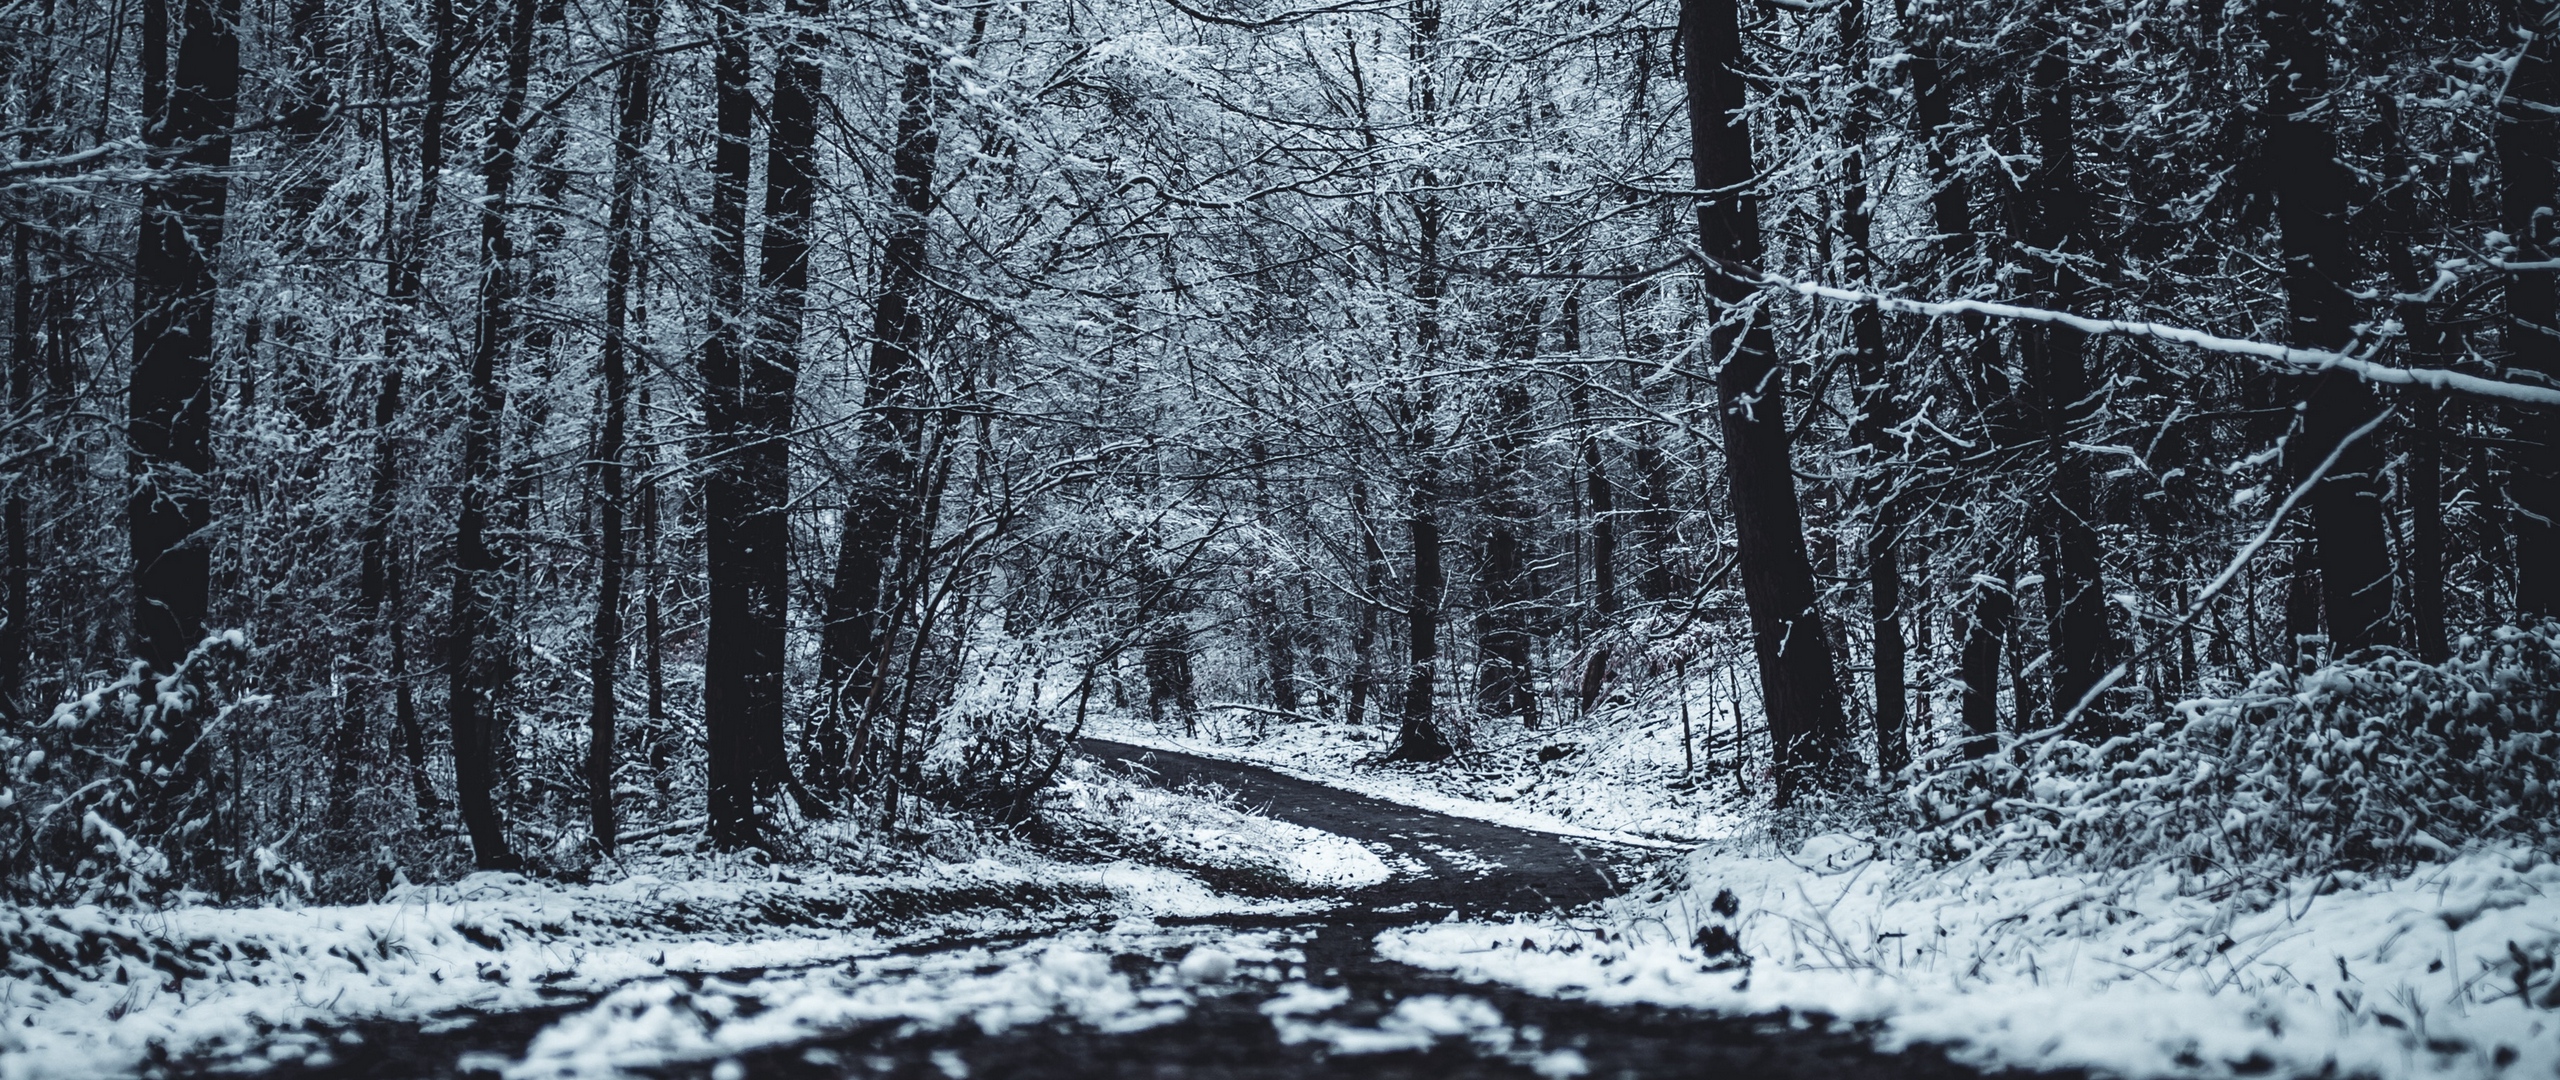 Download wallpaper 2560x1080 forest, trees, trail, winter